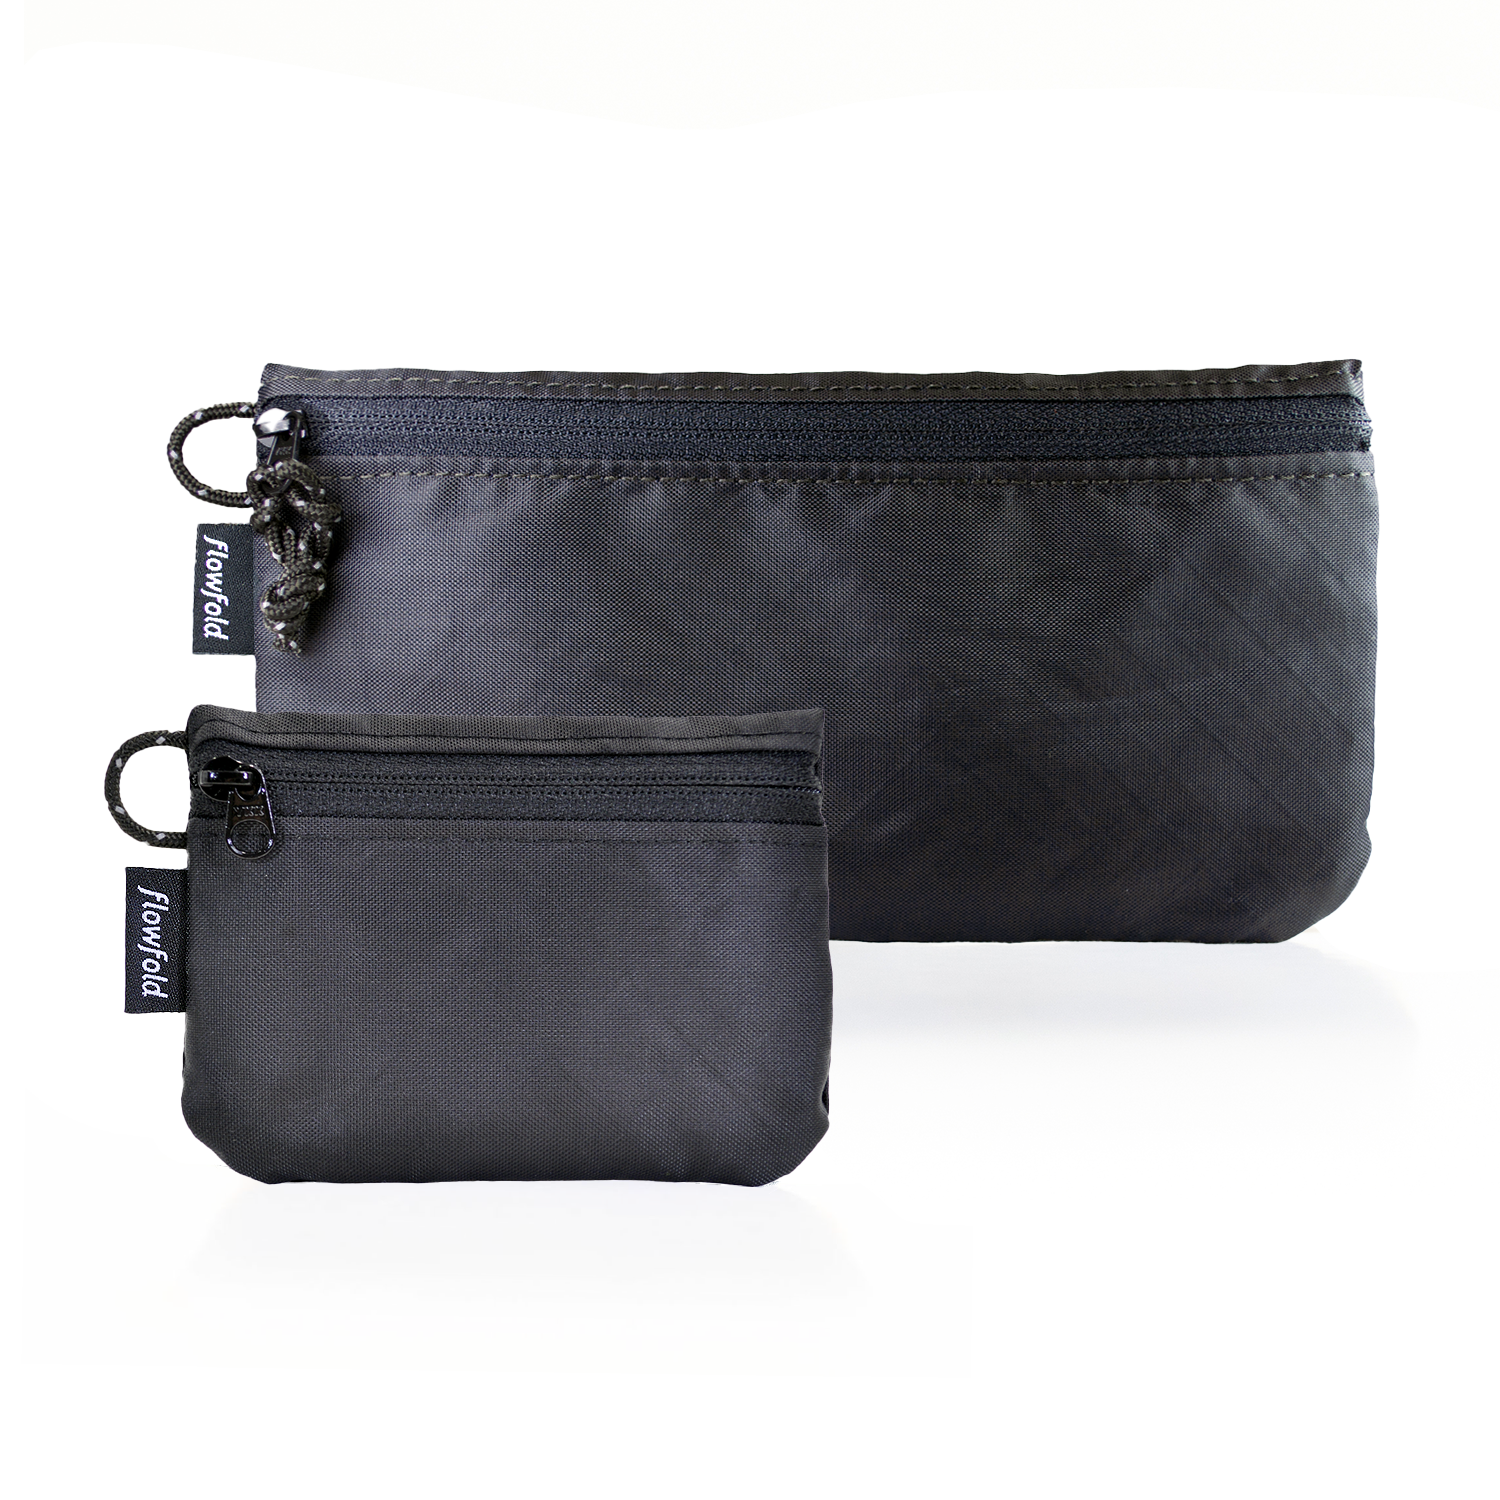 Flowfold Camden Kit: Creator Large Zippered Women&#39;s Wallet For Cash, Cards, and Phone + Essentialist Zipper Pouch, Recycled Black